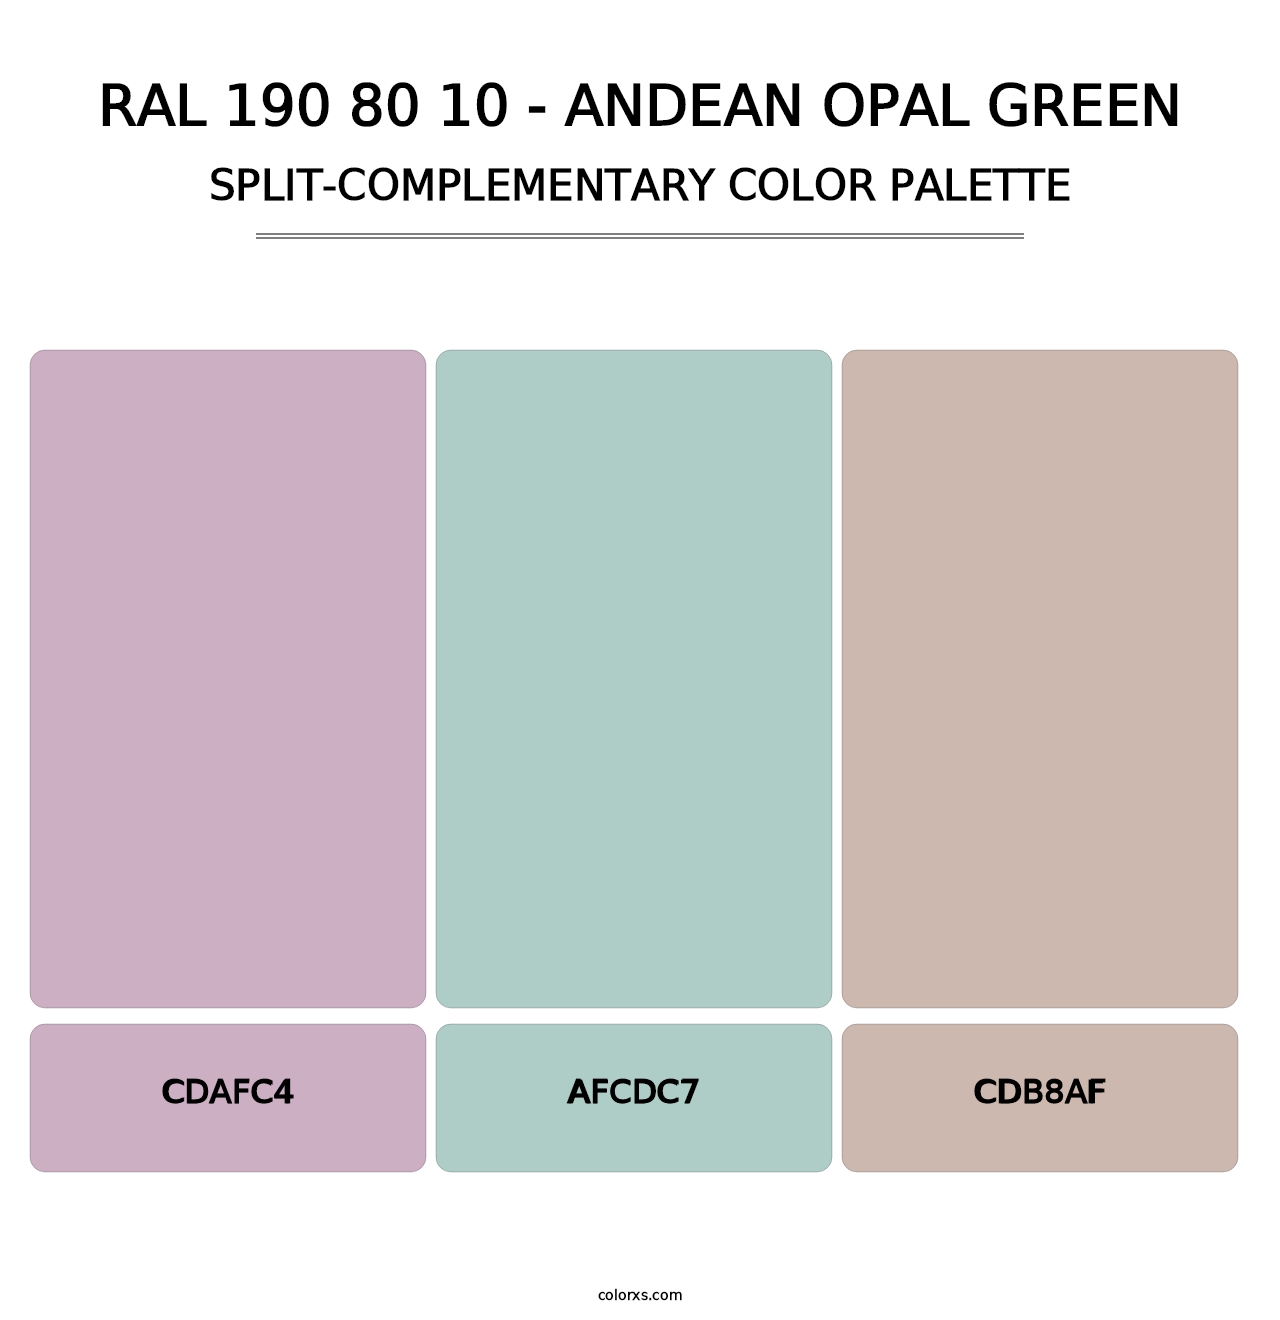 RAL 190 80 10 - Andean Opal Green - Split-Complementary Color Palette